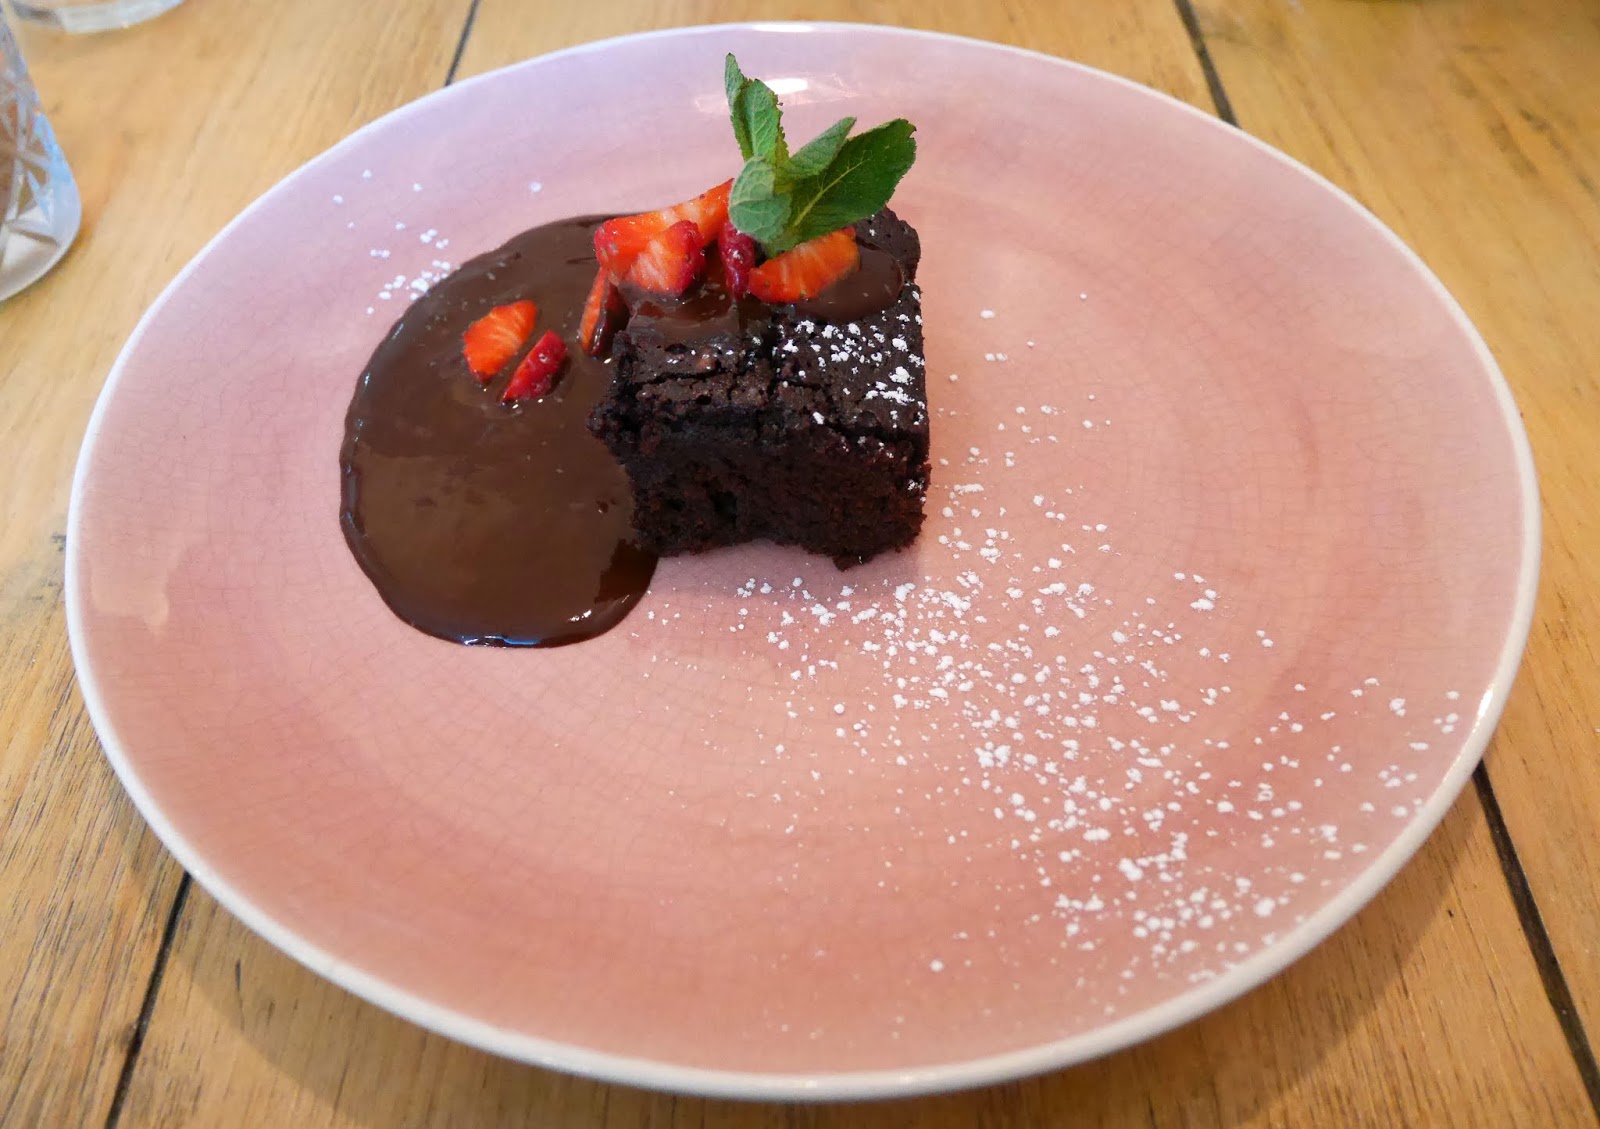 Chocolate brownie for dessert at The Skinny Kitchen in Canterbury, Kent